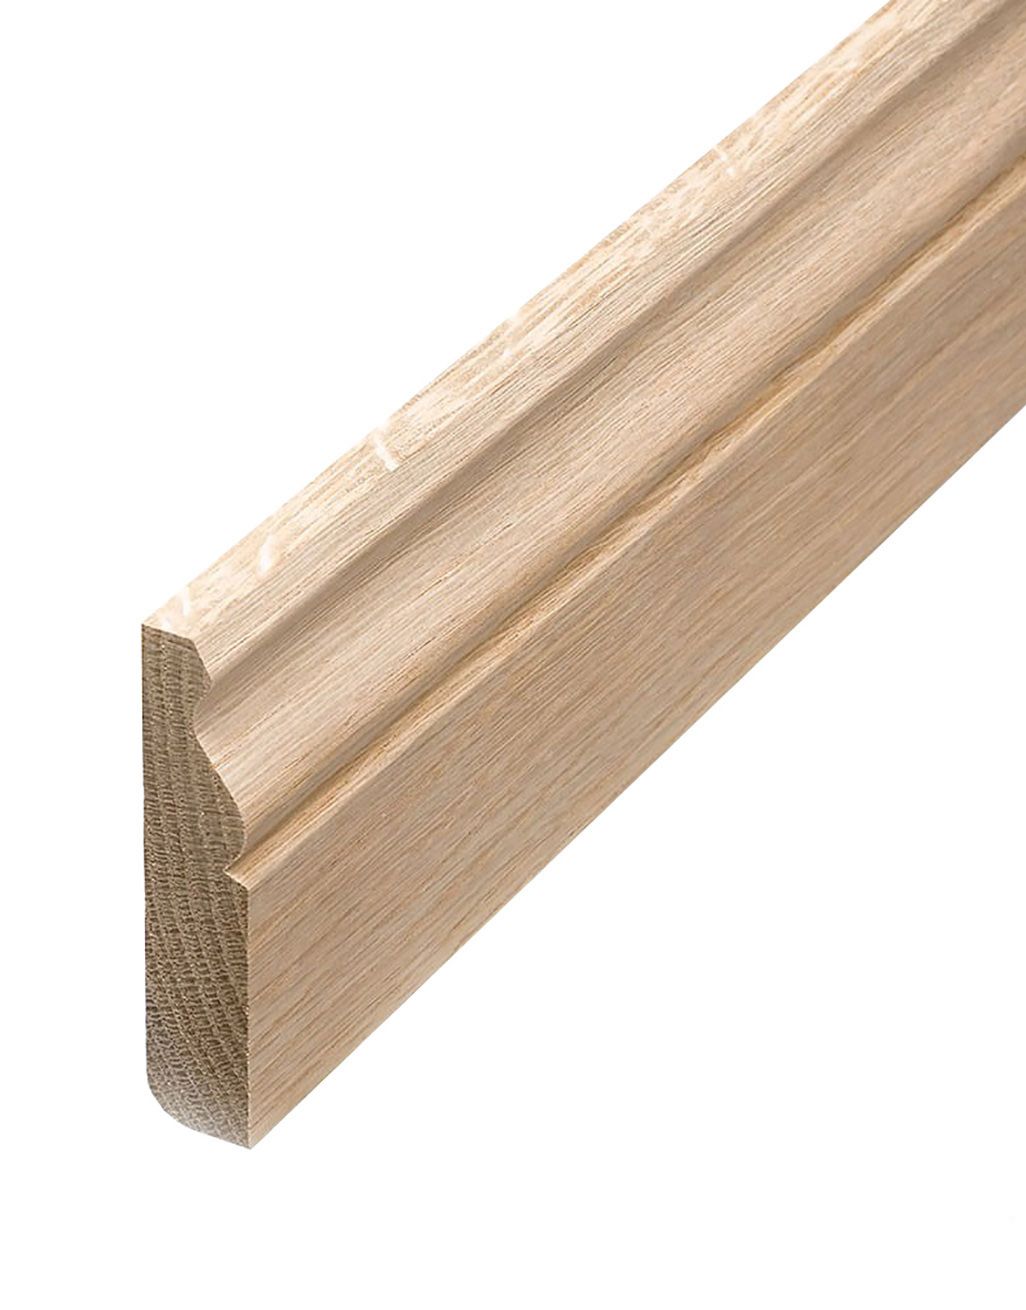 WS1 Unfinished Solid Oak Skirting 1